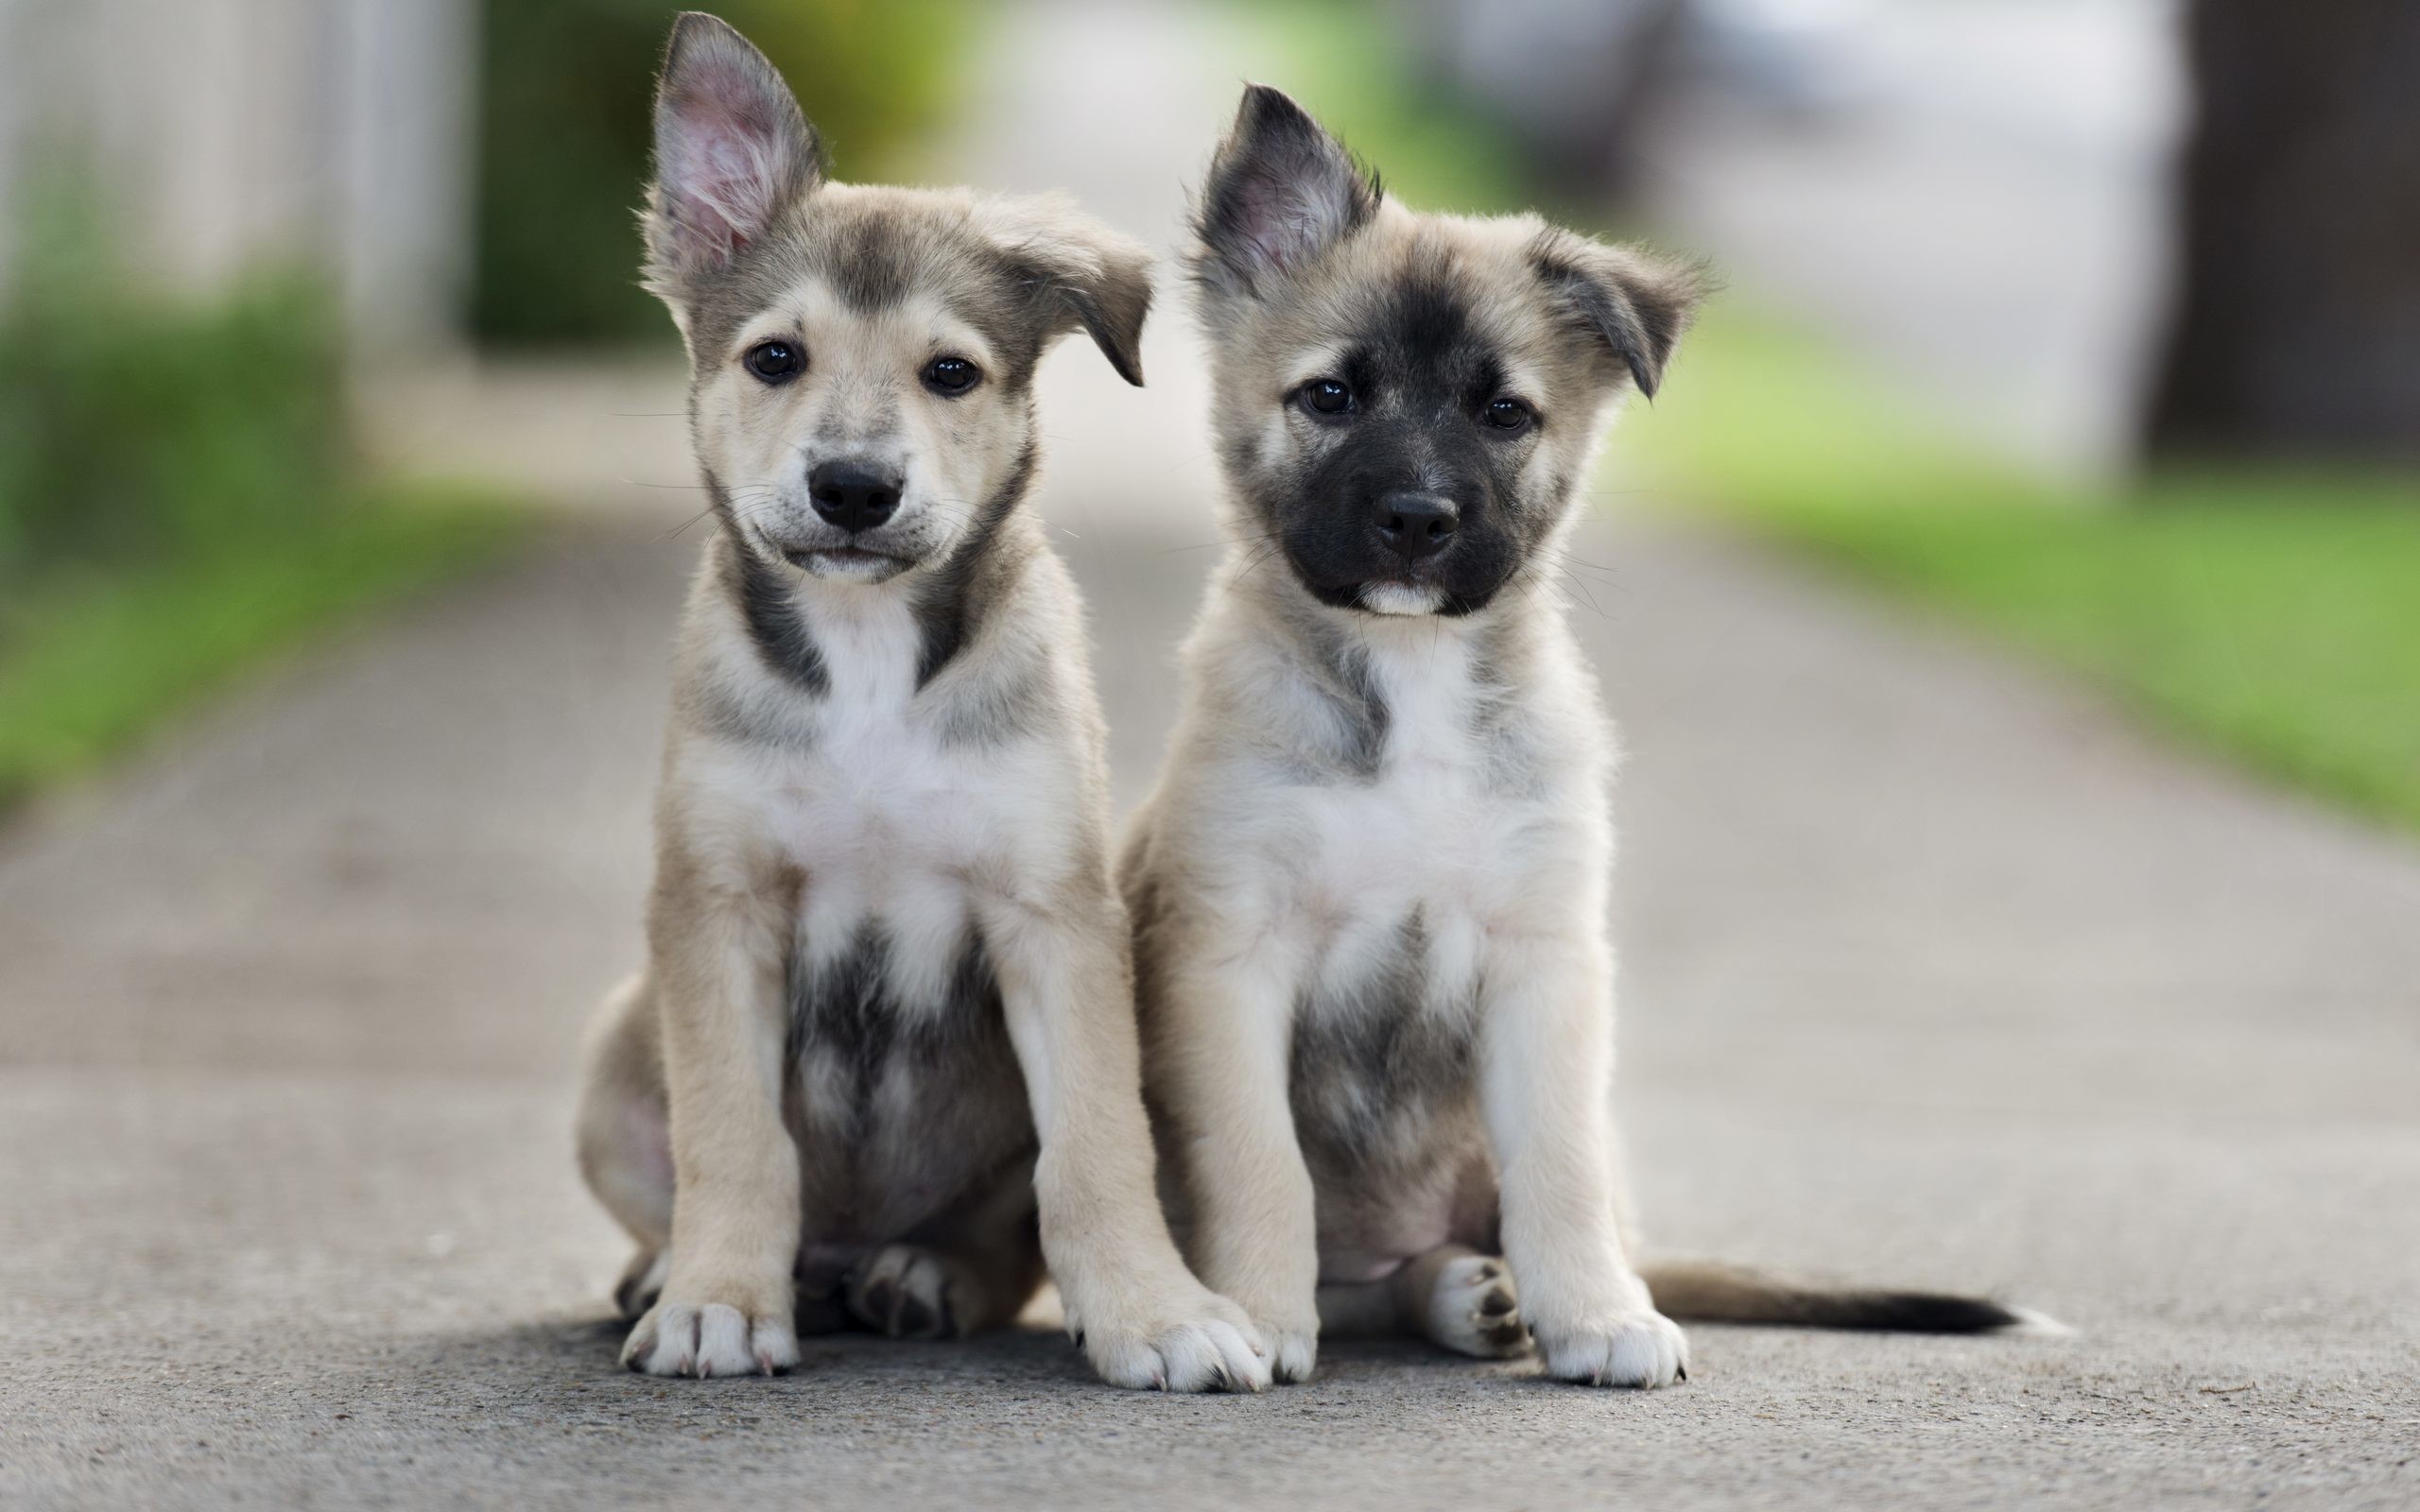 2560x1600 ... Live Cute Puppy Wallpapers | Cute Puppy Wallpapers Collection ...